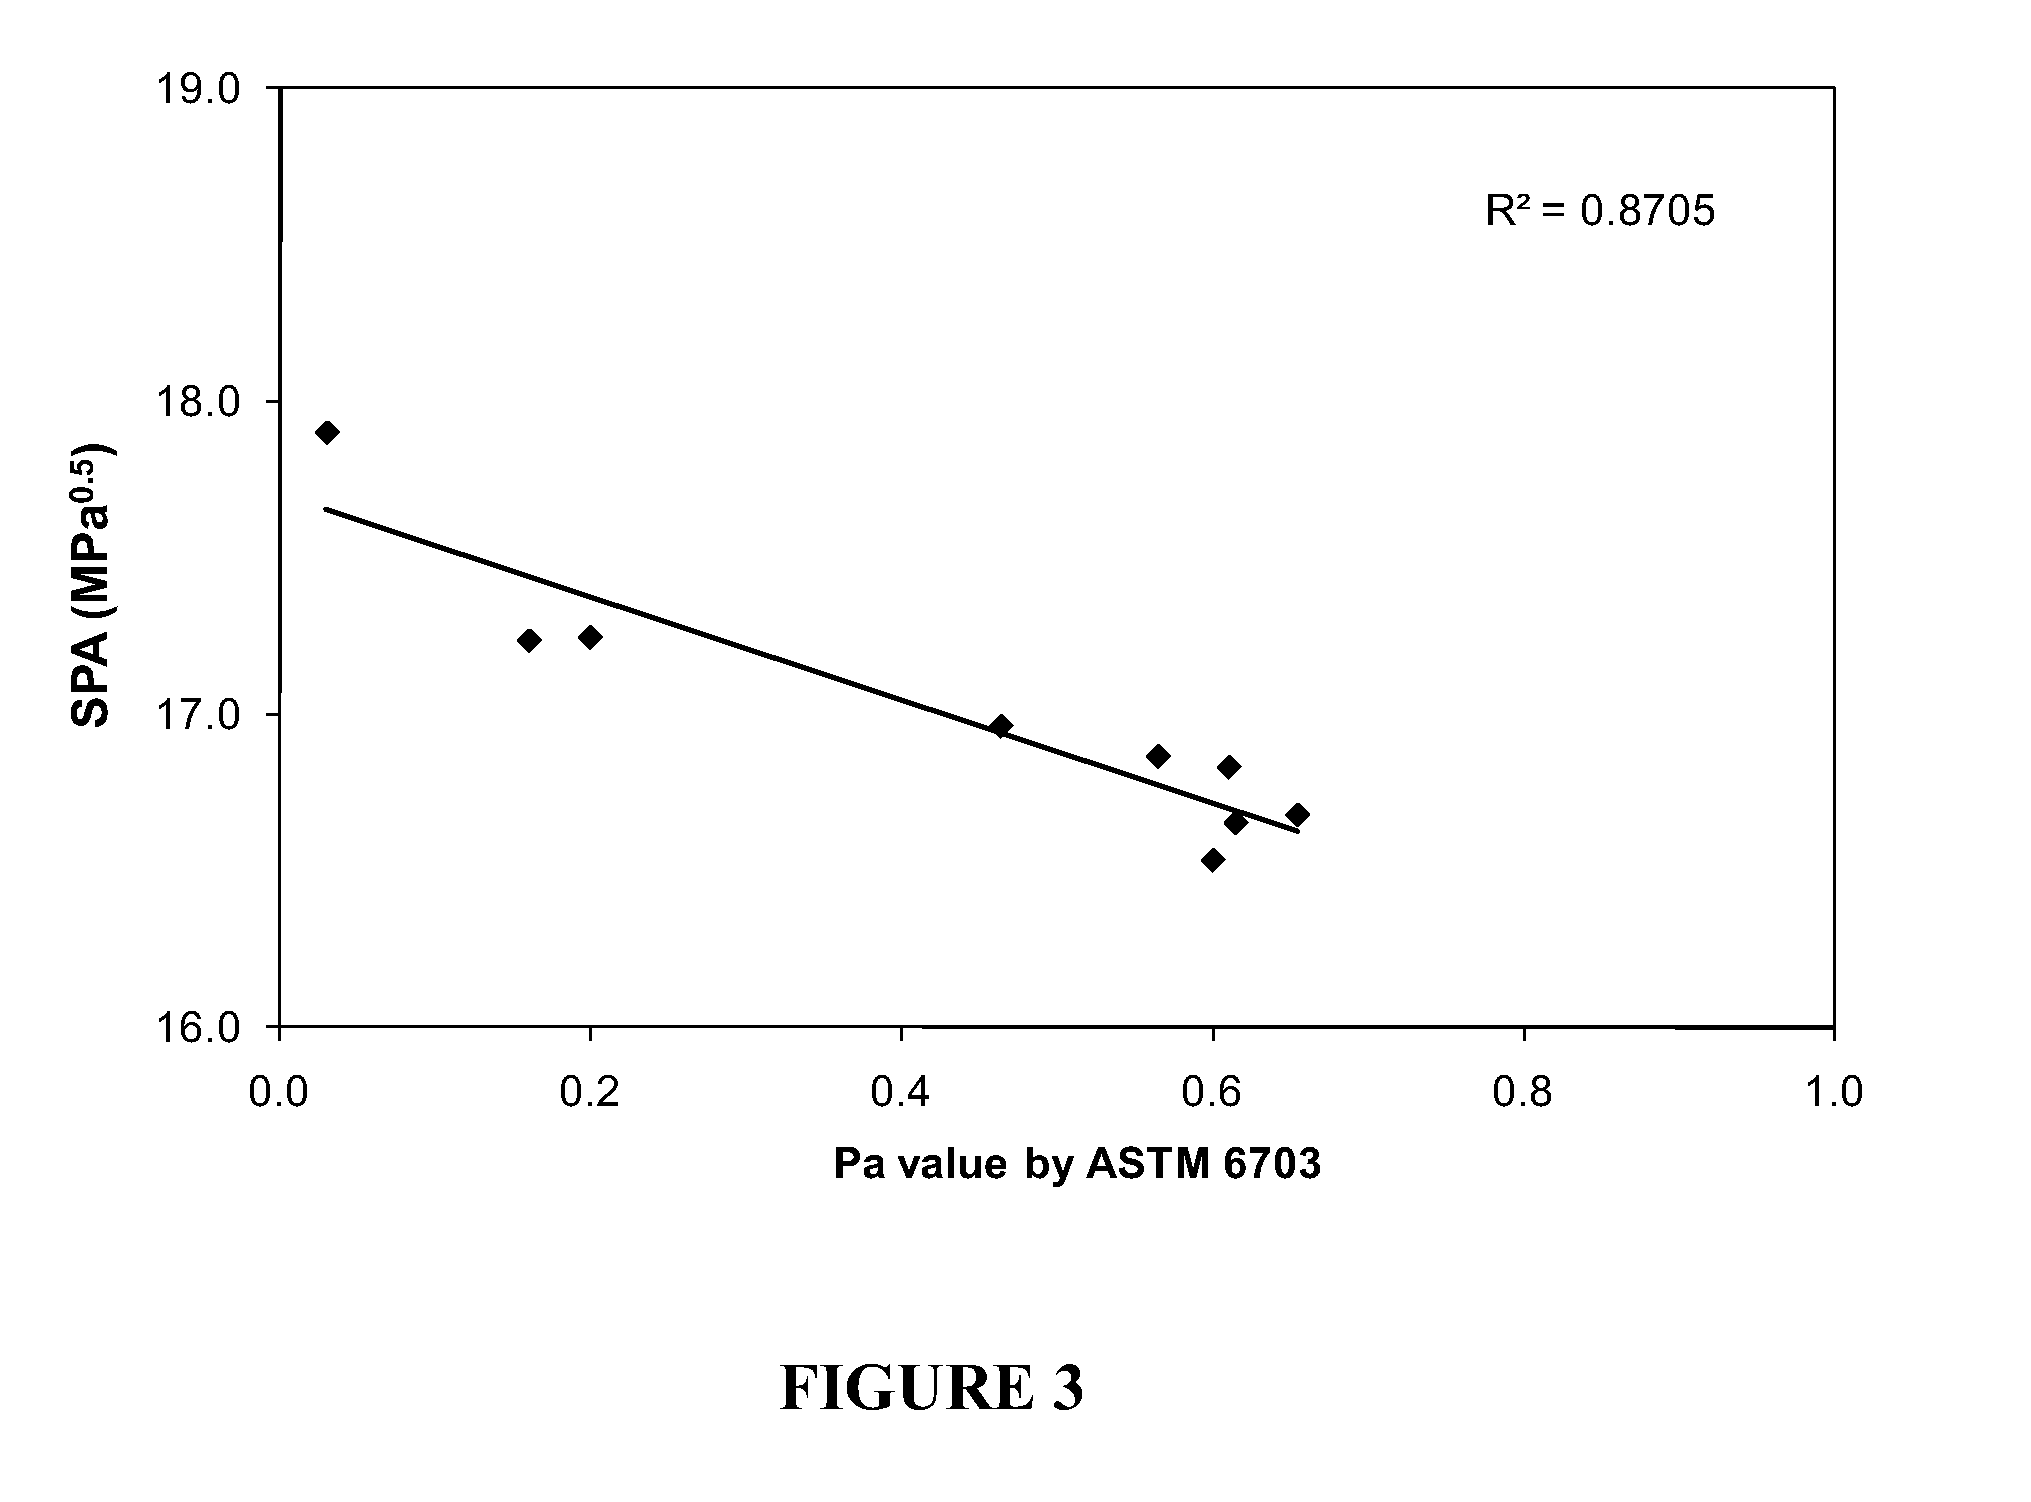 Method for determining asphaltene stability of a hydrocarbon-containing material